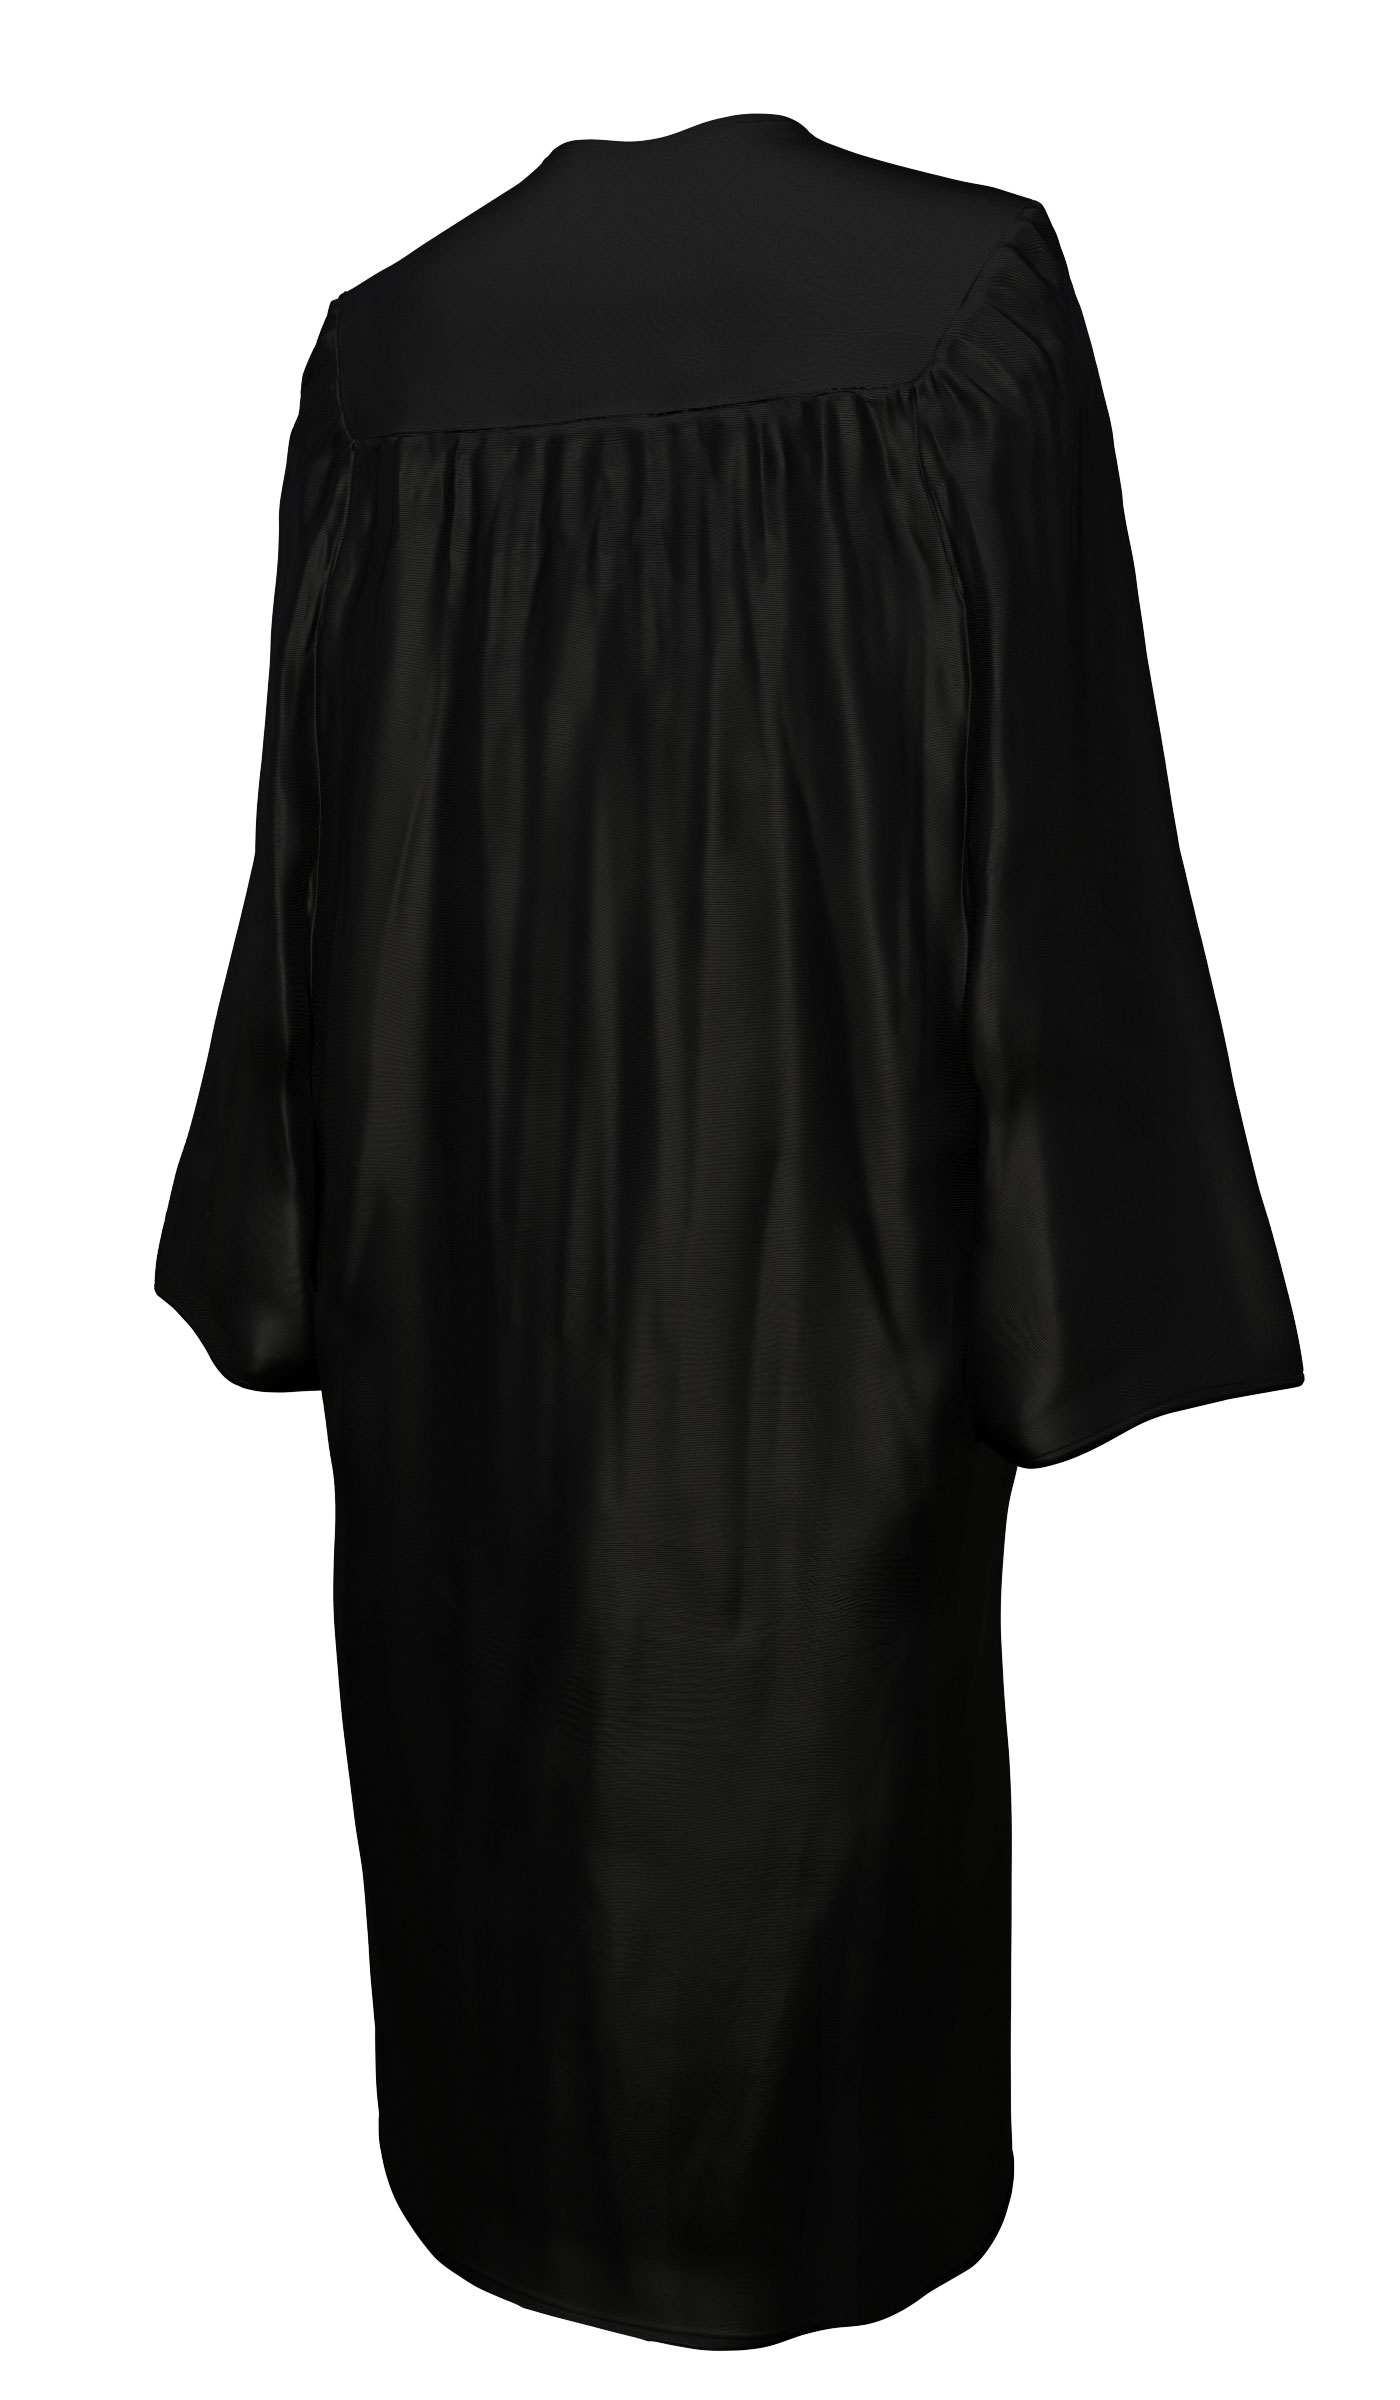 Black Graduation Gown and Cap with Yellow and Black Hood – Mera Convocation